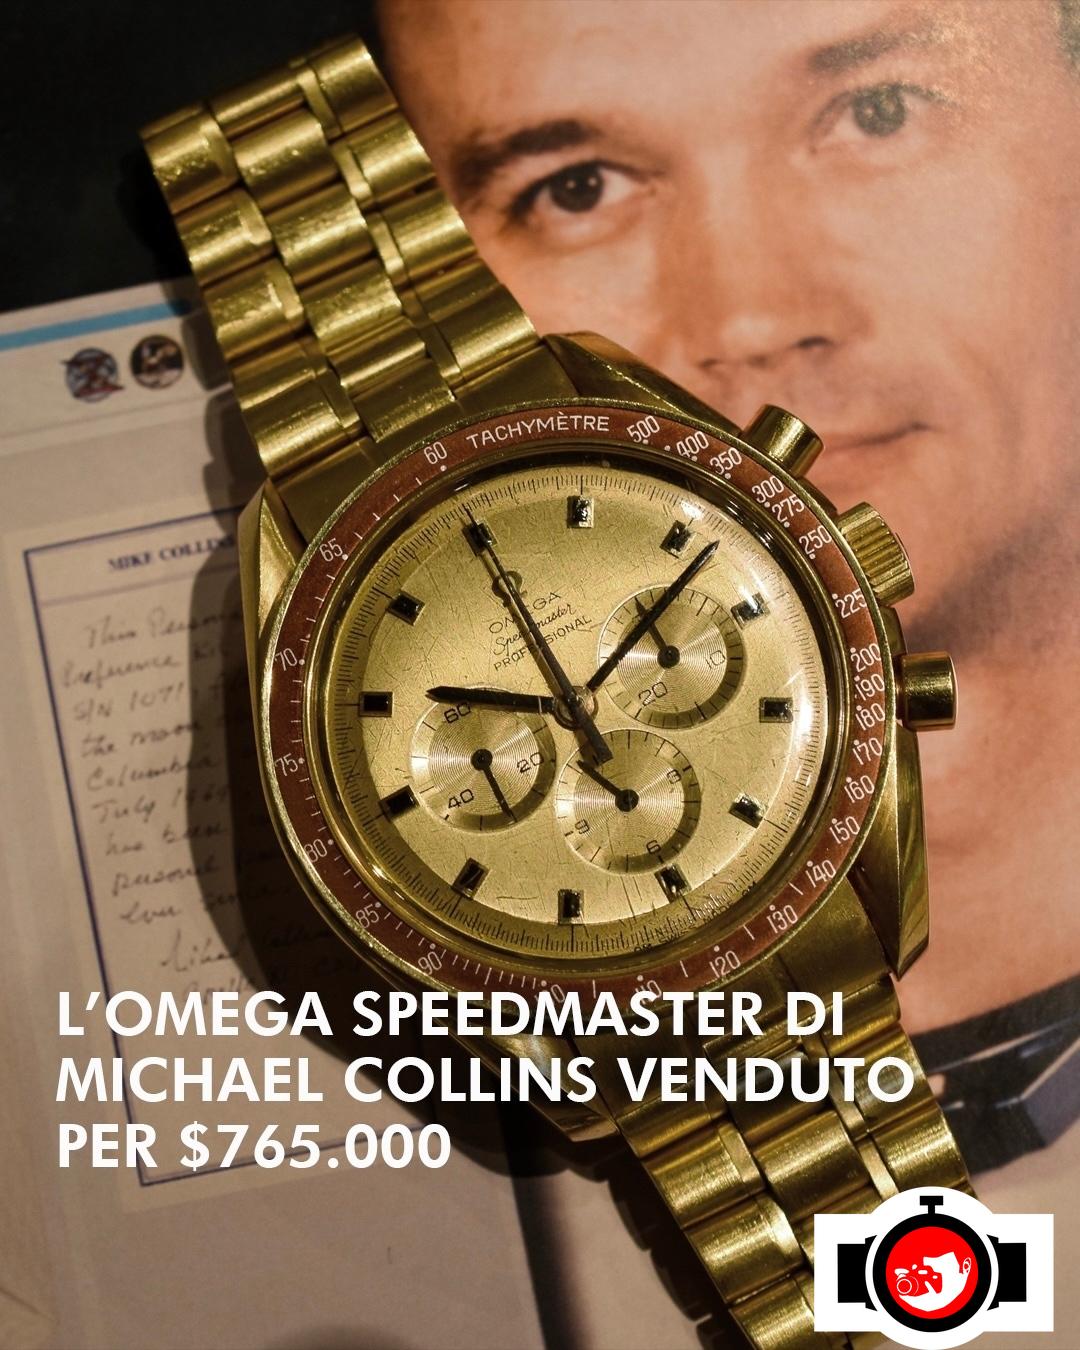 Discovering Michael Collins's Omega Speedmaster Apollo XI Watch 